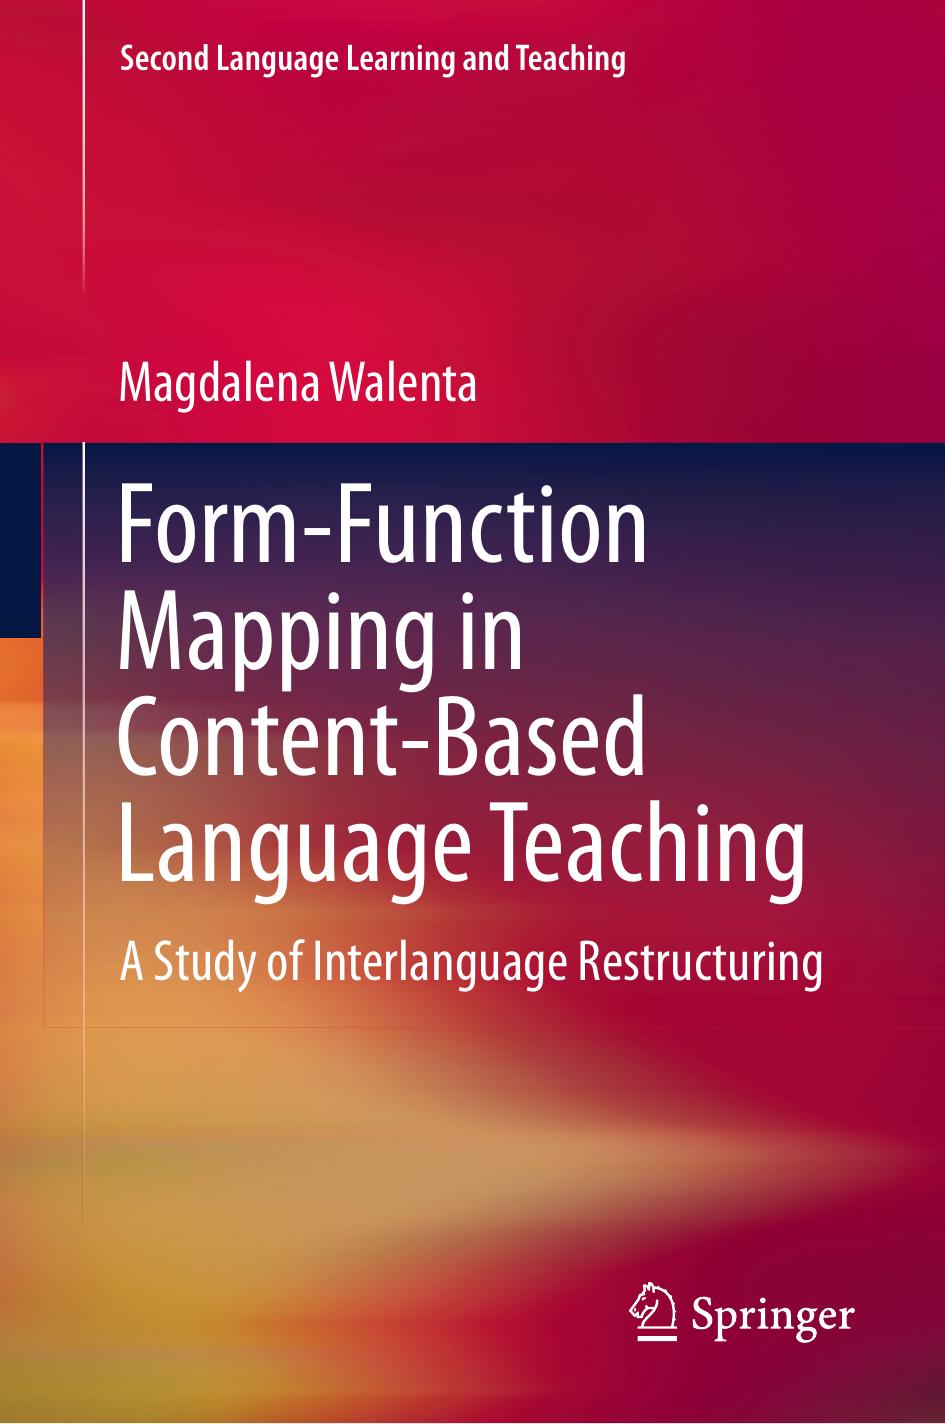 Form-Function Mapping in Content-Based Language Teaching: A Study of Interlanguage Restructuring